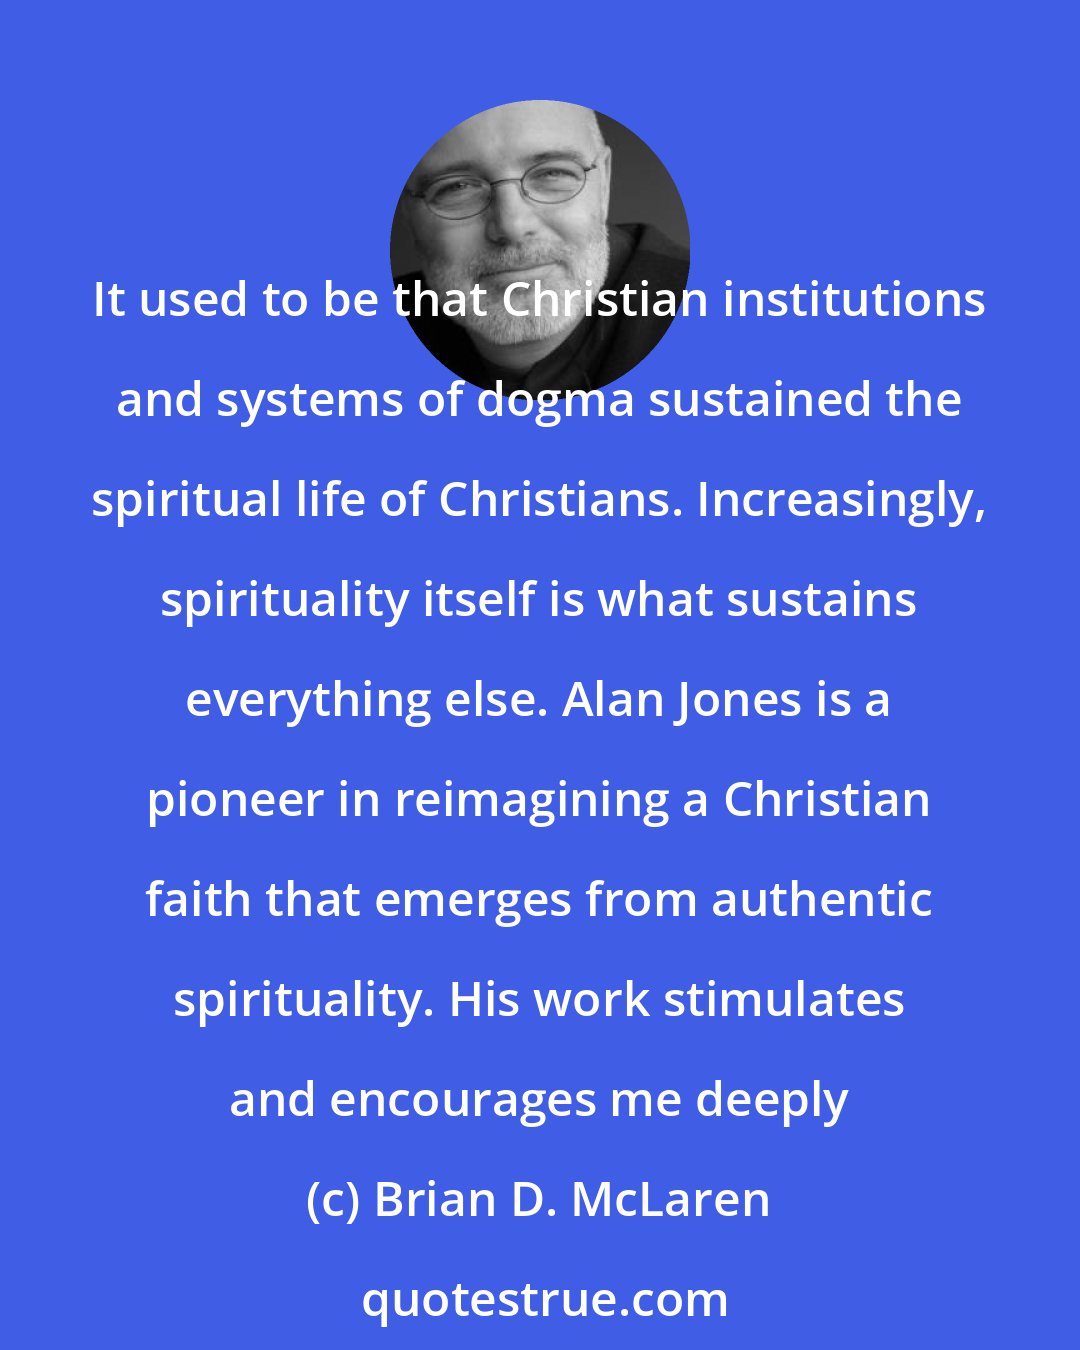 Brian D. McLaren: It used to be that Christian institutions and systems of dogma sustained the spiritual life of Christians. Increasingly, spirituality itself is what sustains everything else. Alan Jones is a pioneer in reimagining a Christian faith that emerges from authentic spirituality. His work stimulates and encourages me deeply